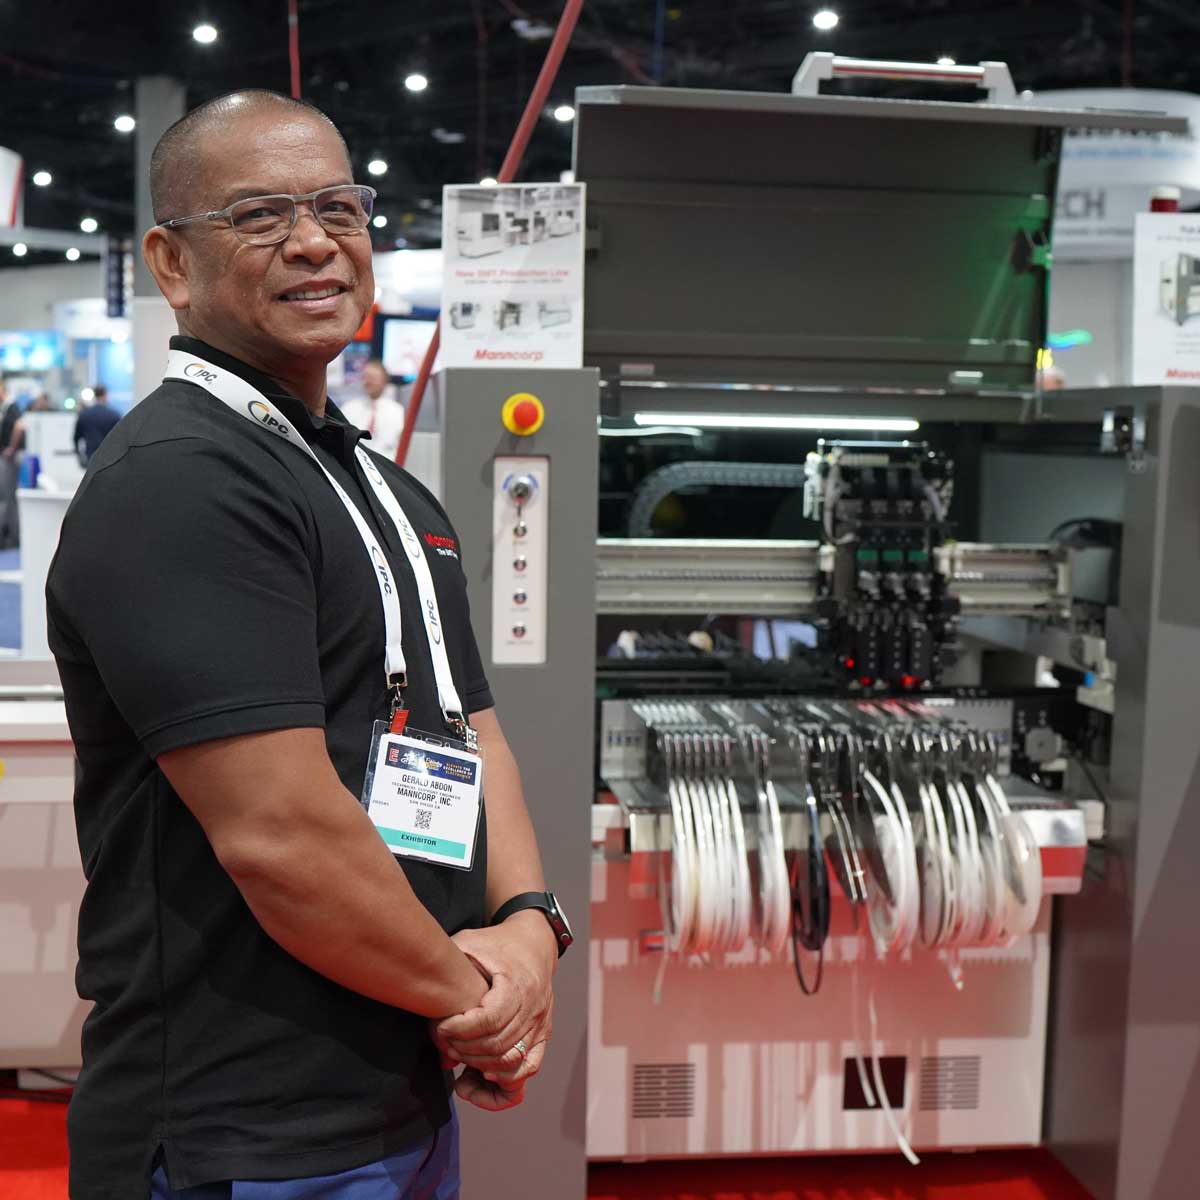 Gerald Abdon at an Expo with Manncorp